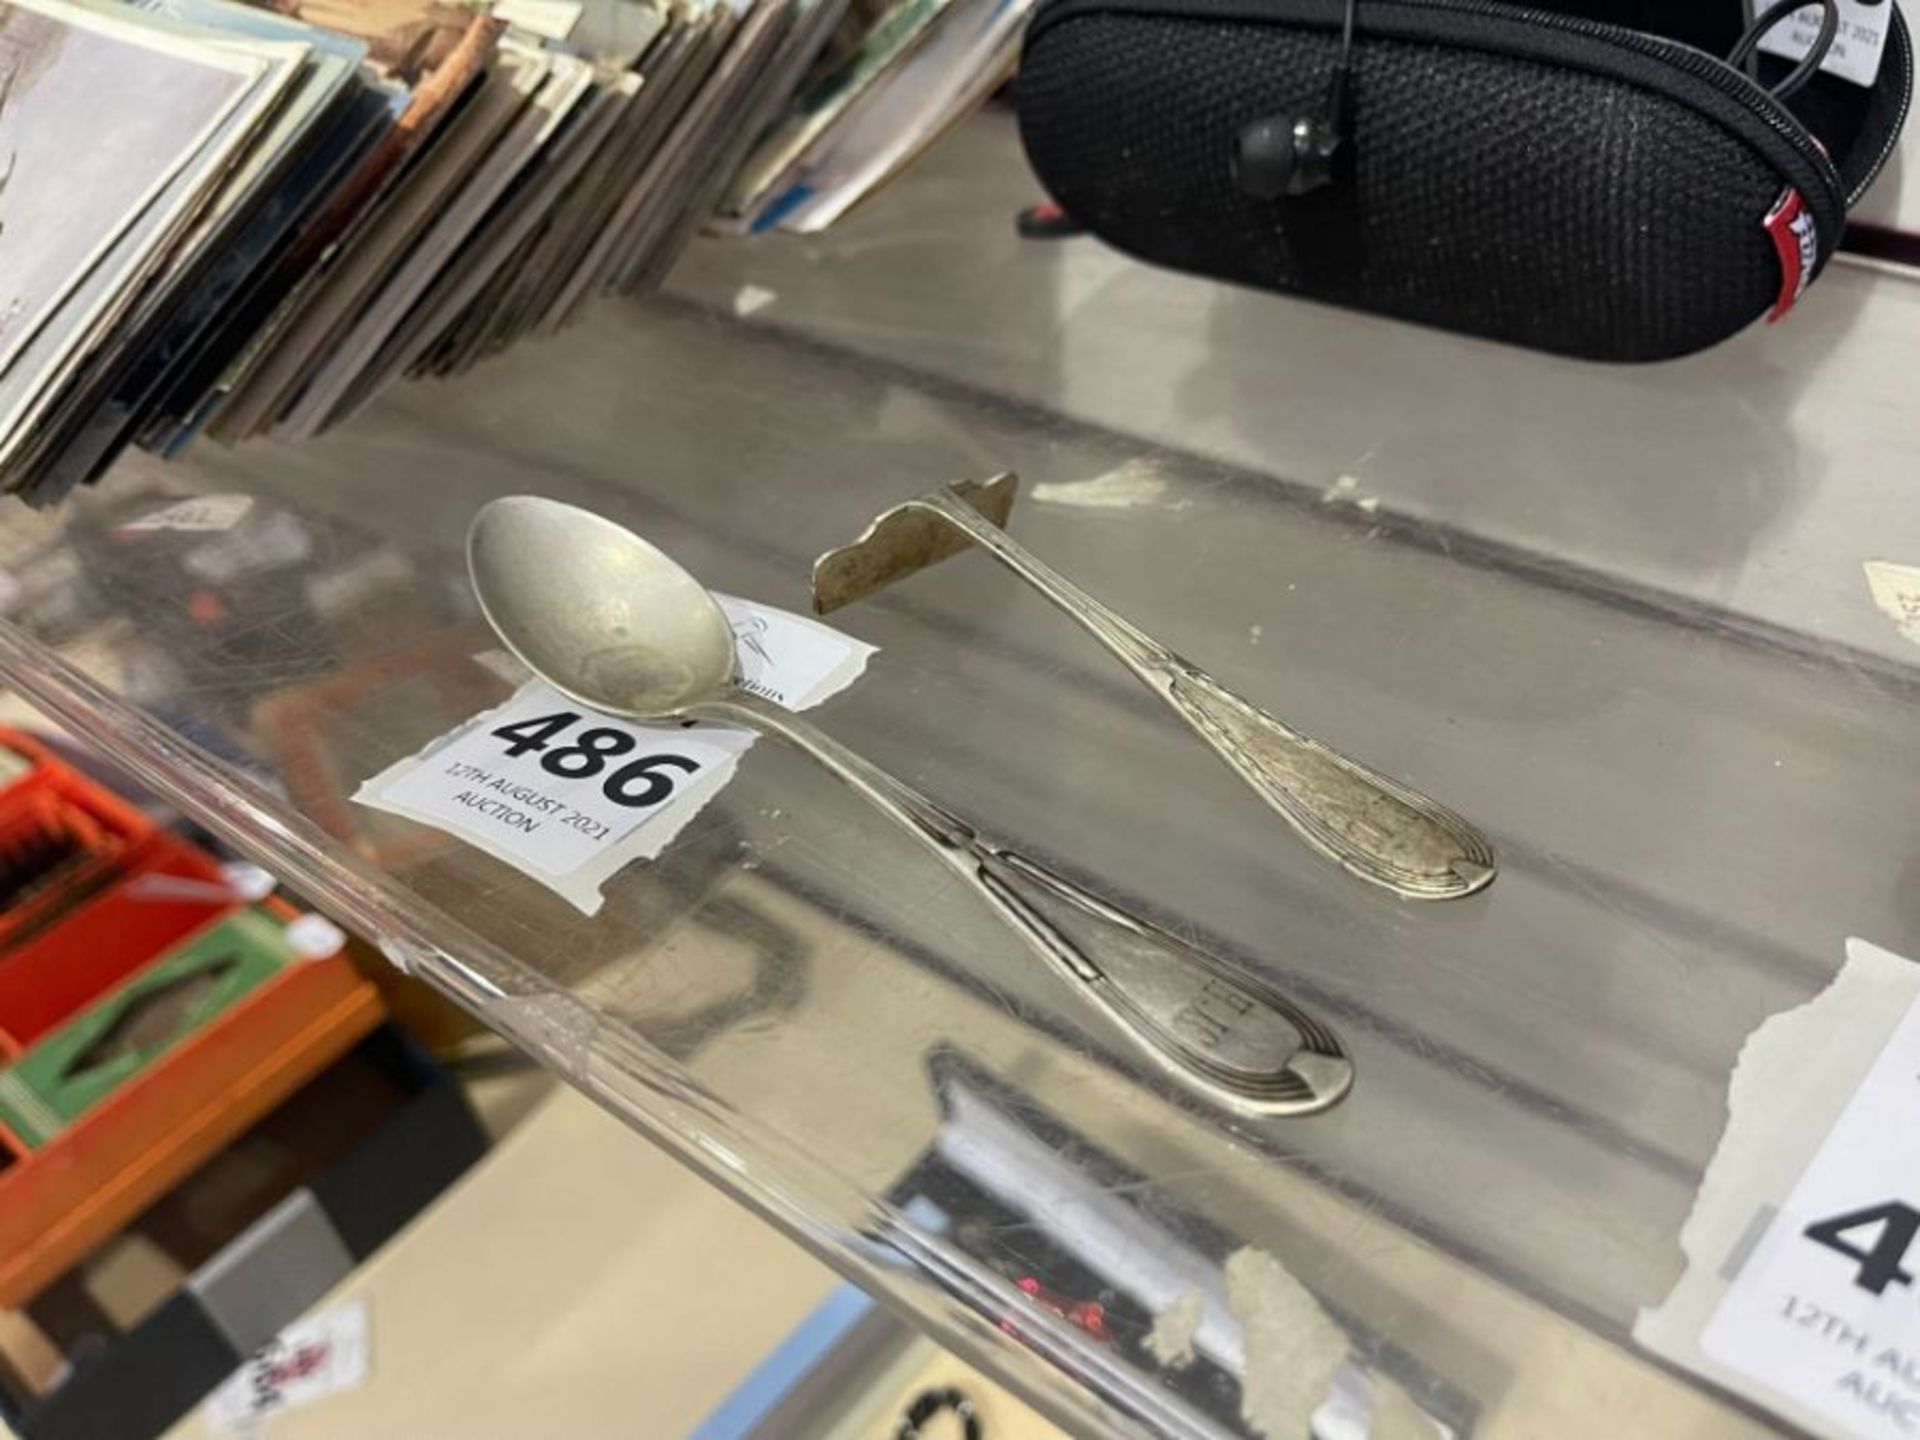 CONTINENTAL 800 SILVER STAMPED SPOON & PUSHER